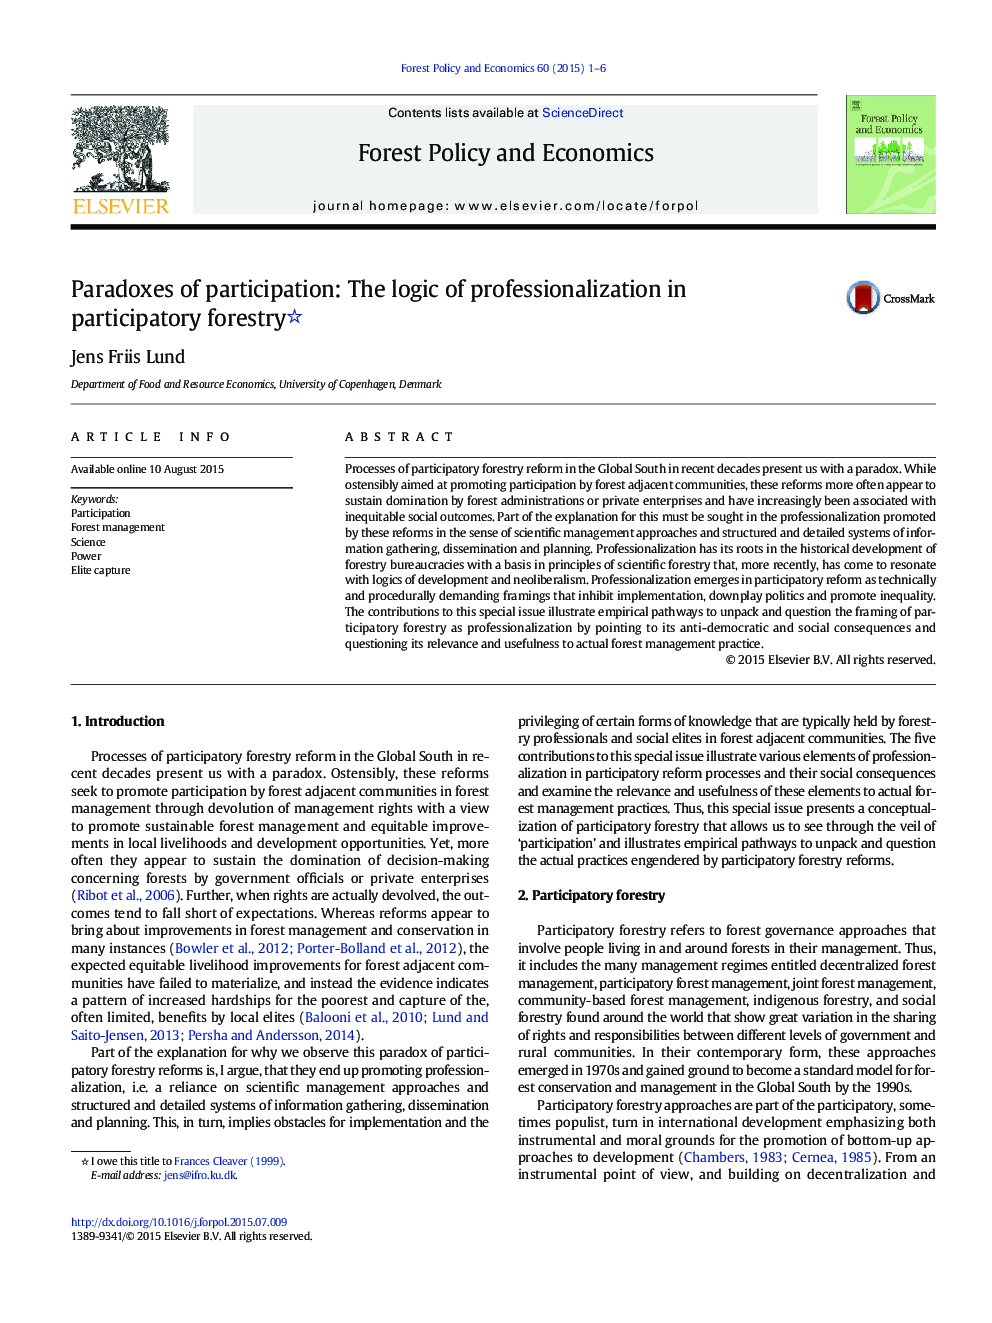 Paradoxes of participation: The logic of professionalization in participatory forestry 